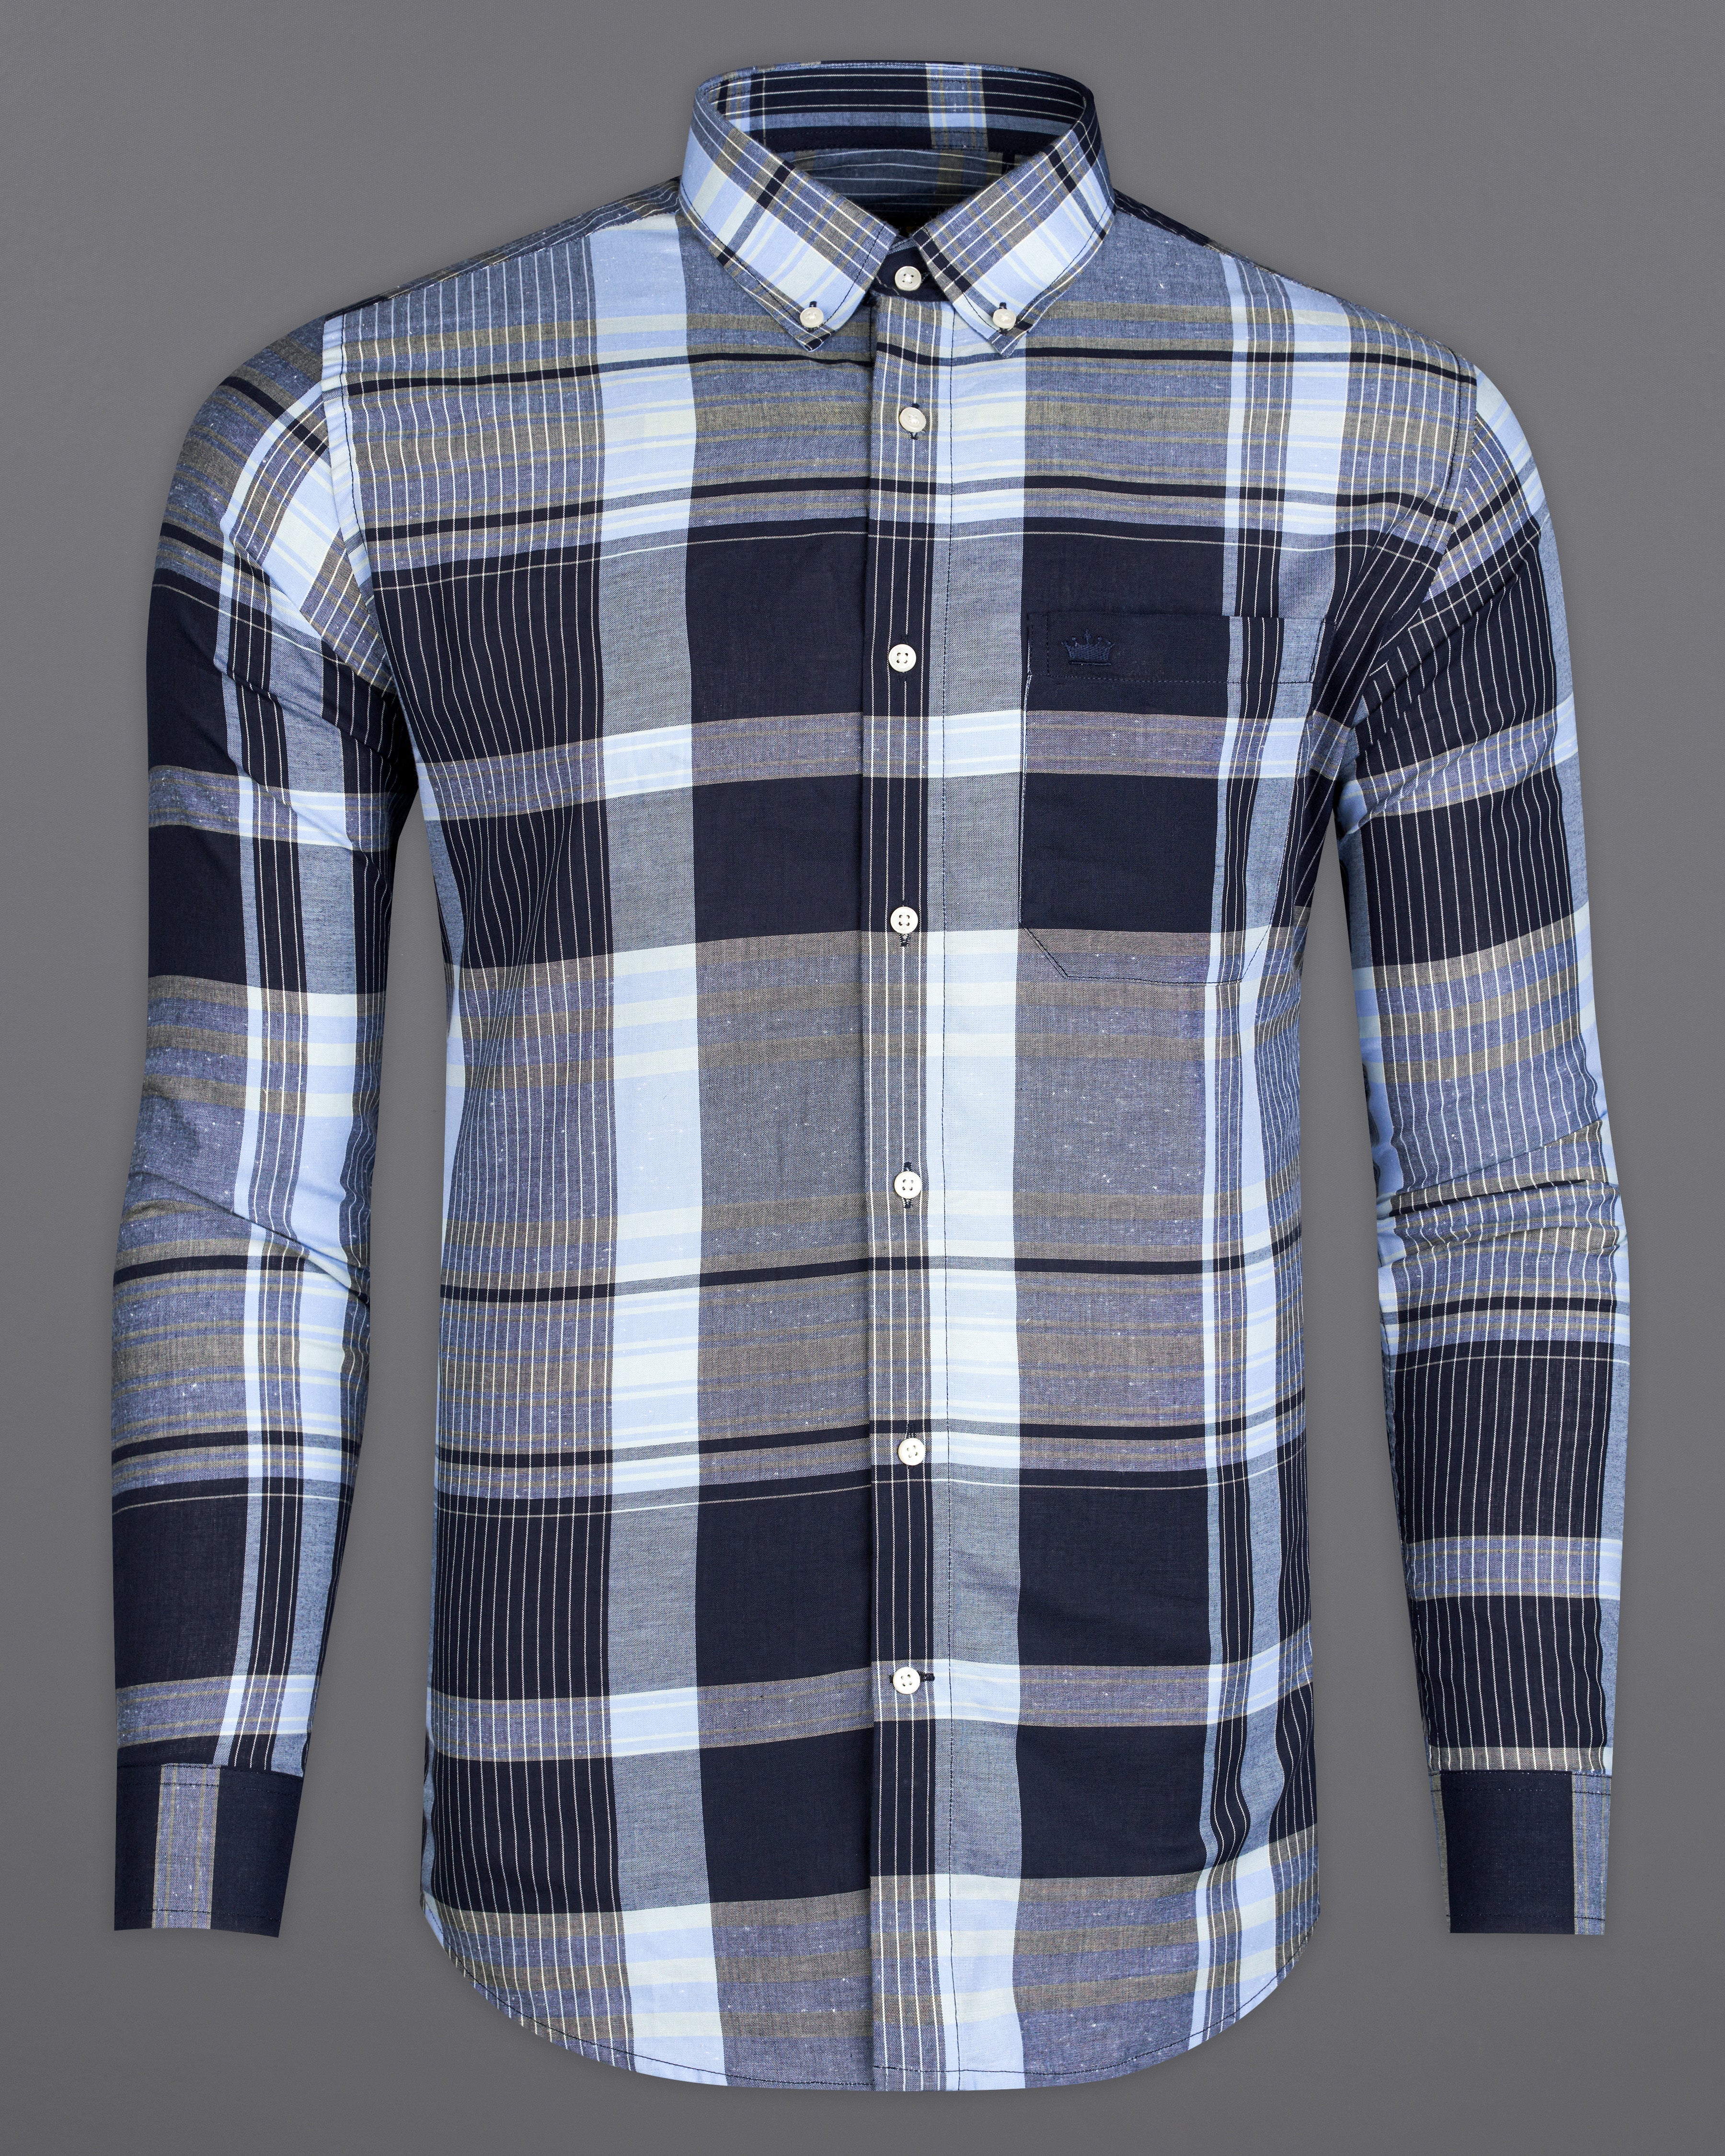 Mirage Navy Blue with Periwinkle Blue and White Premium Cotton Shirt